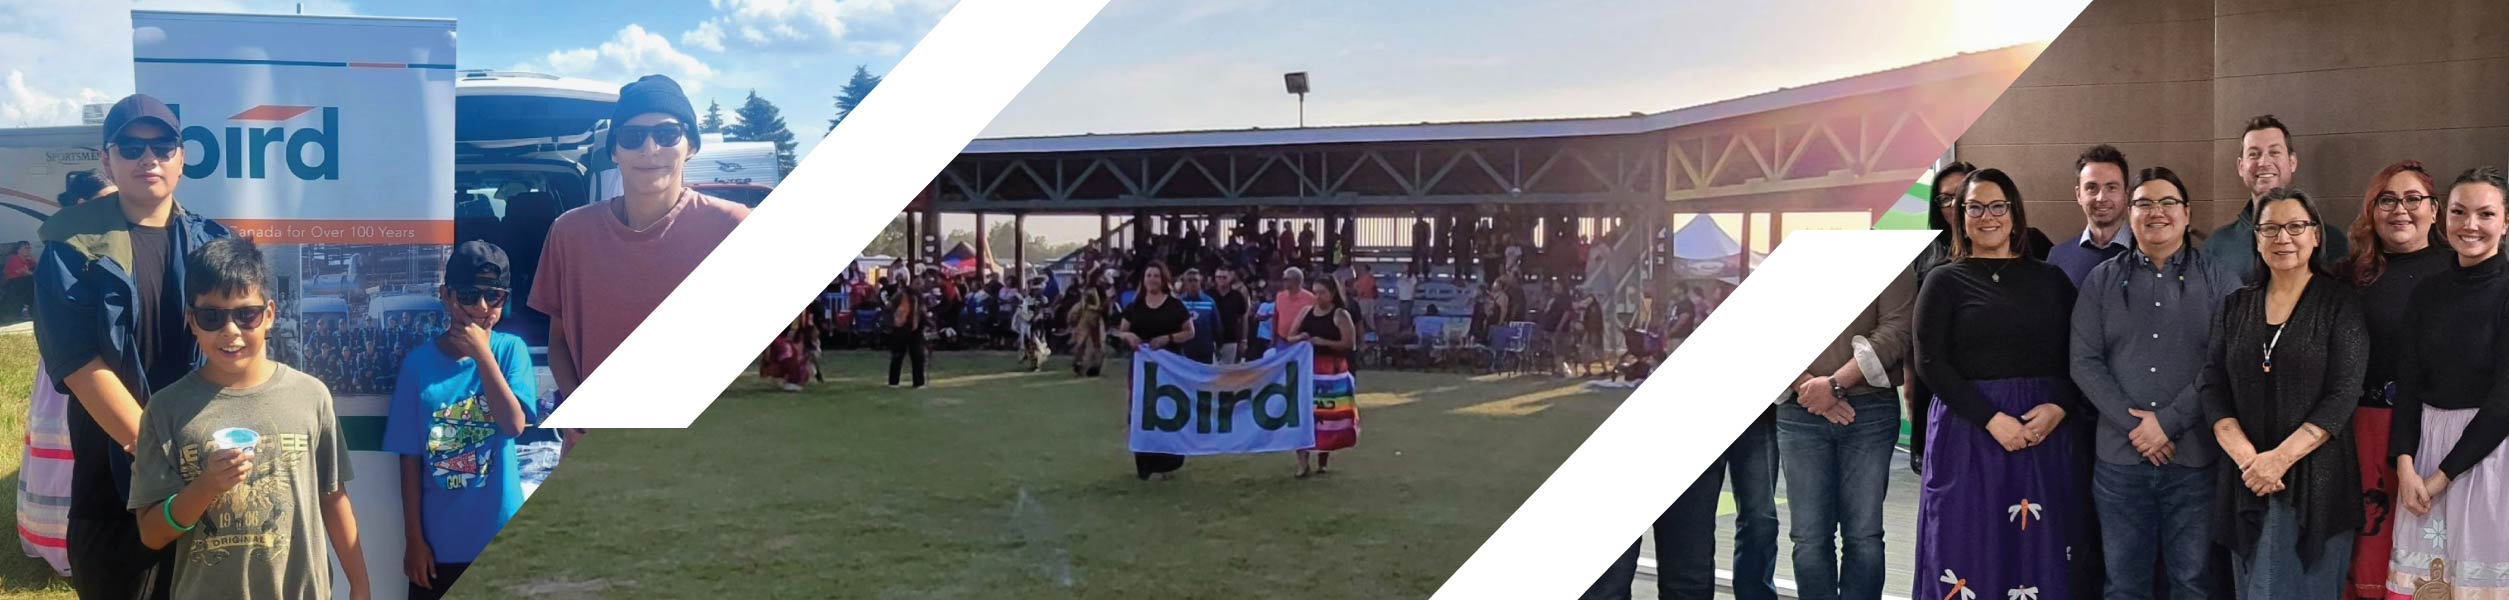 Children of a First Nations Community gather in front of a Bird sign